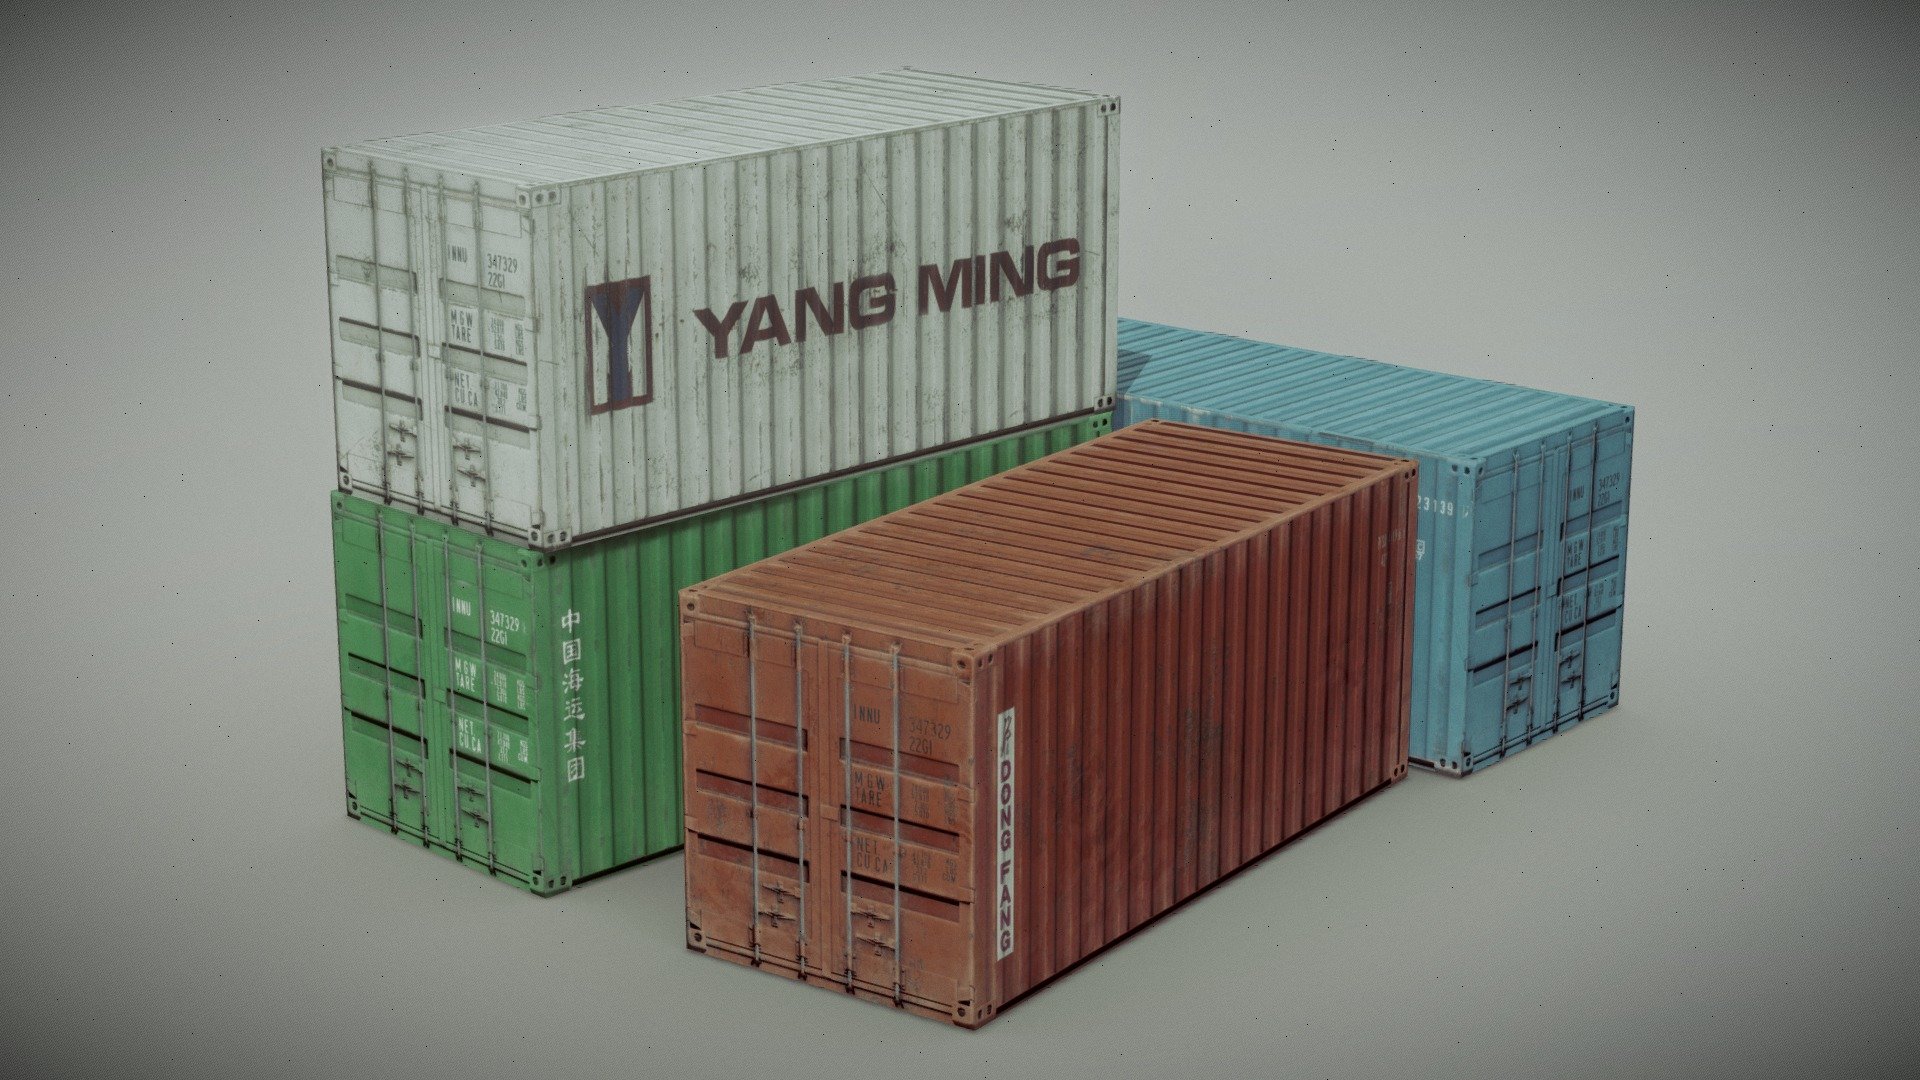 A shipping container is a container with strength suitable to withstand shipment, storage, and handling. Shipping containers range from large reusable steel boxes used for intermodal shipments to the ubiquitous corrugated boxes. In the context of international shipping trade, &ldquo;container